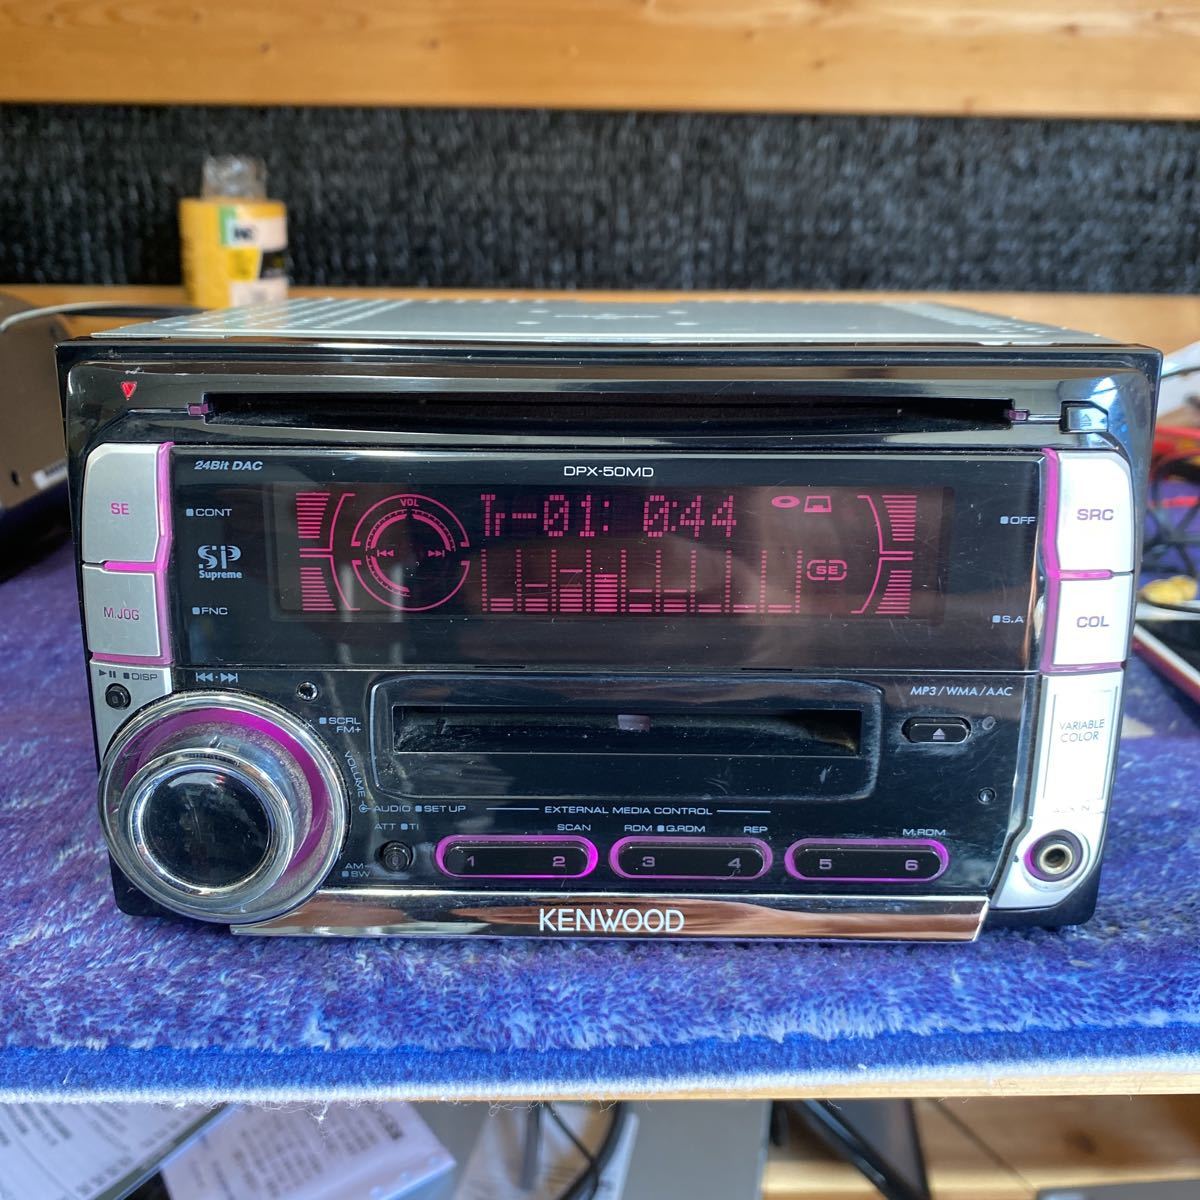 KENWOOD CD/MDプレーヤーDPX-50MD_画像1